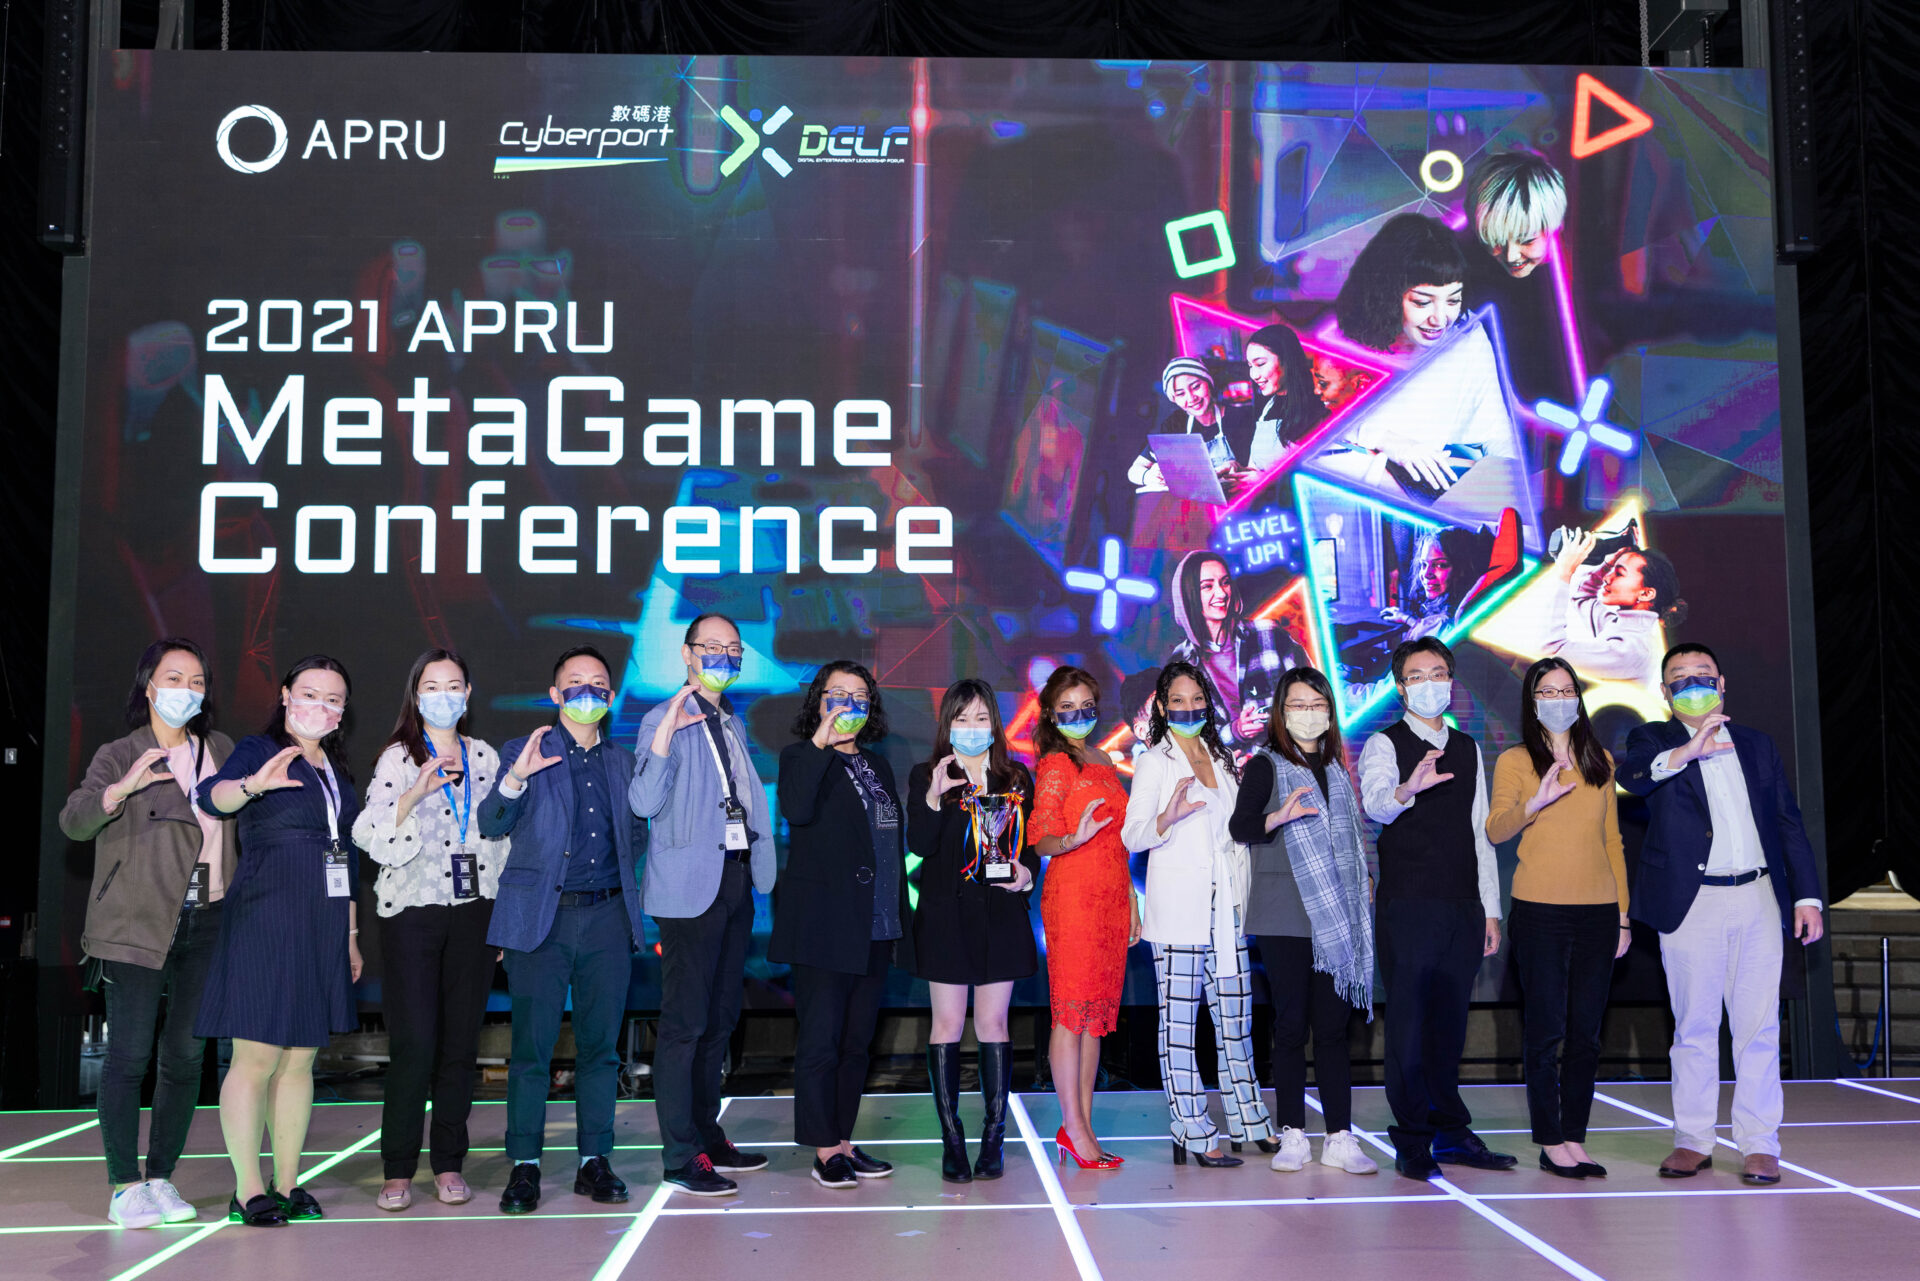 APRU - Association of Pacific Rim Universities - We are going live soon!  Join today! #APRU #MetaGame Conference Cyberport 數碼港More at www.apru- metagames.org